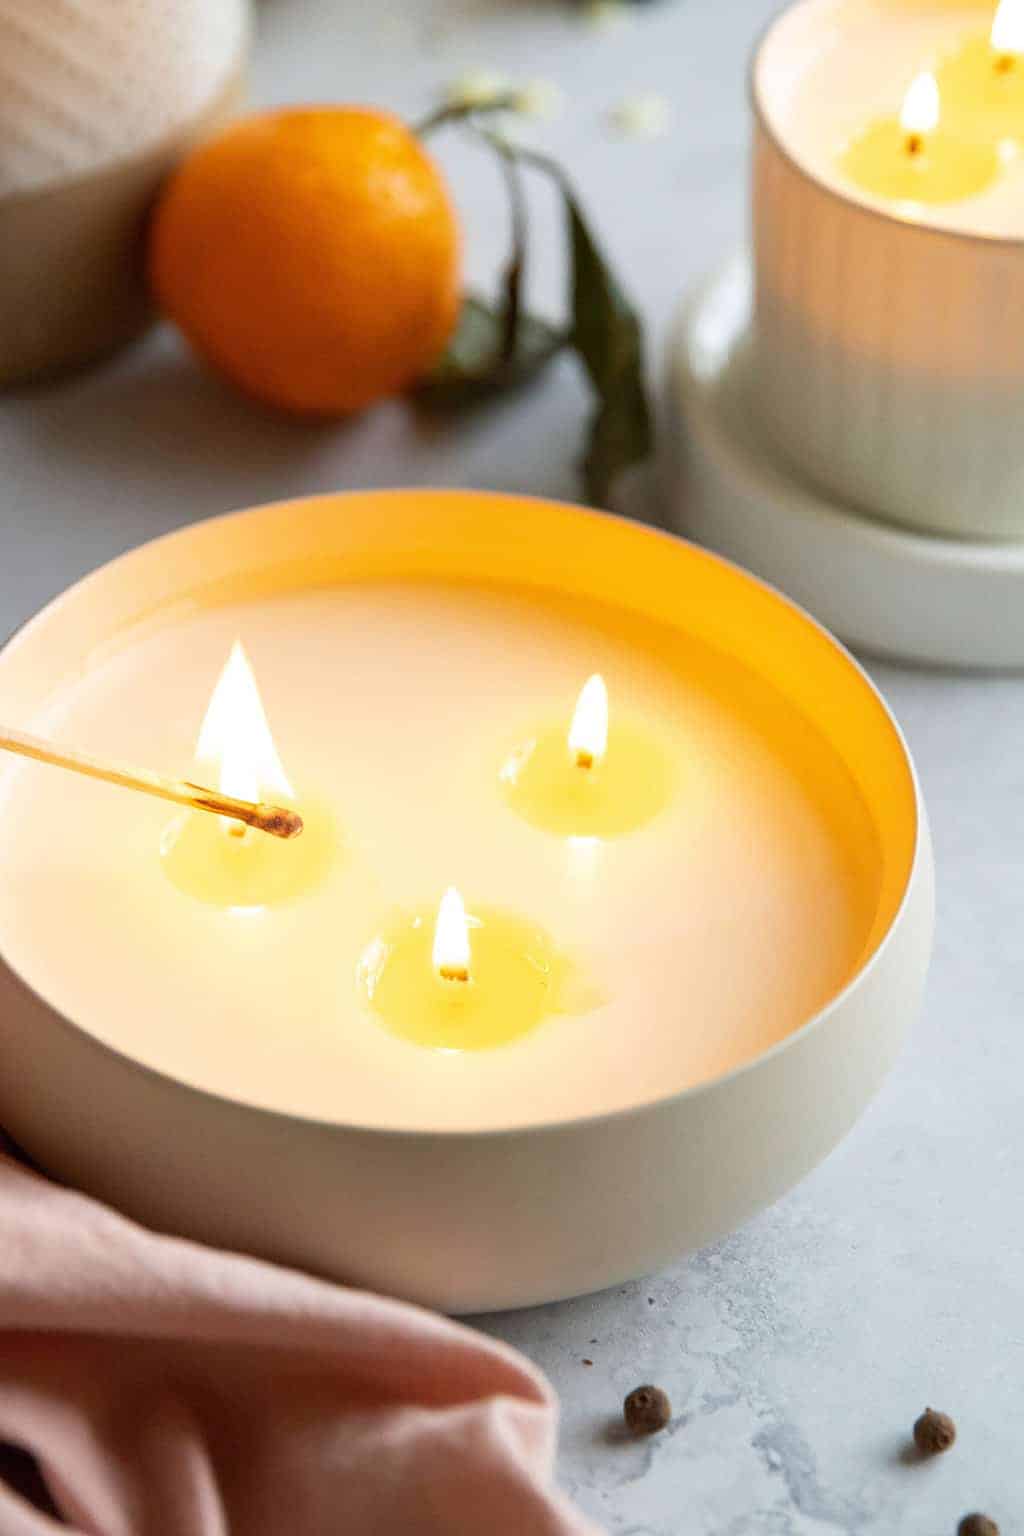 With a fresh pine and sweet orange scent, these 3 wick candles are sure bring a warm, hygge glow and cozy vibe to just about any room. 